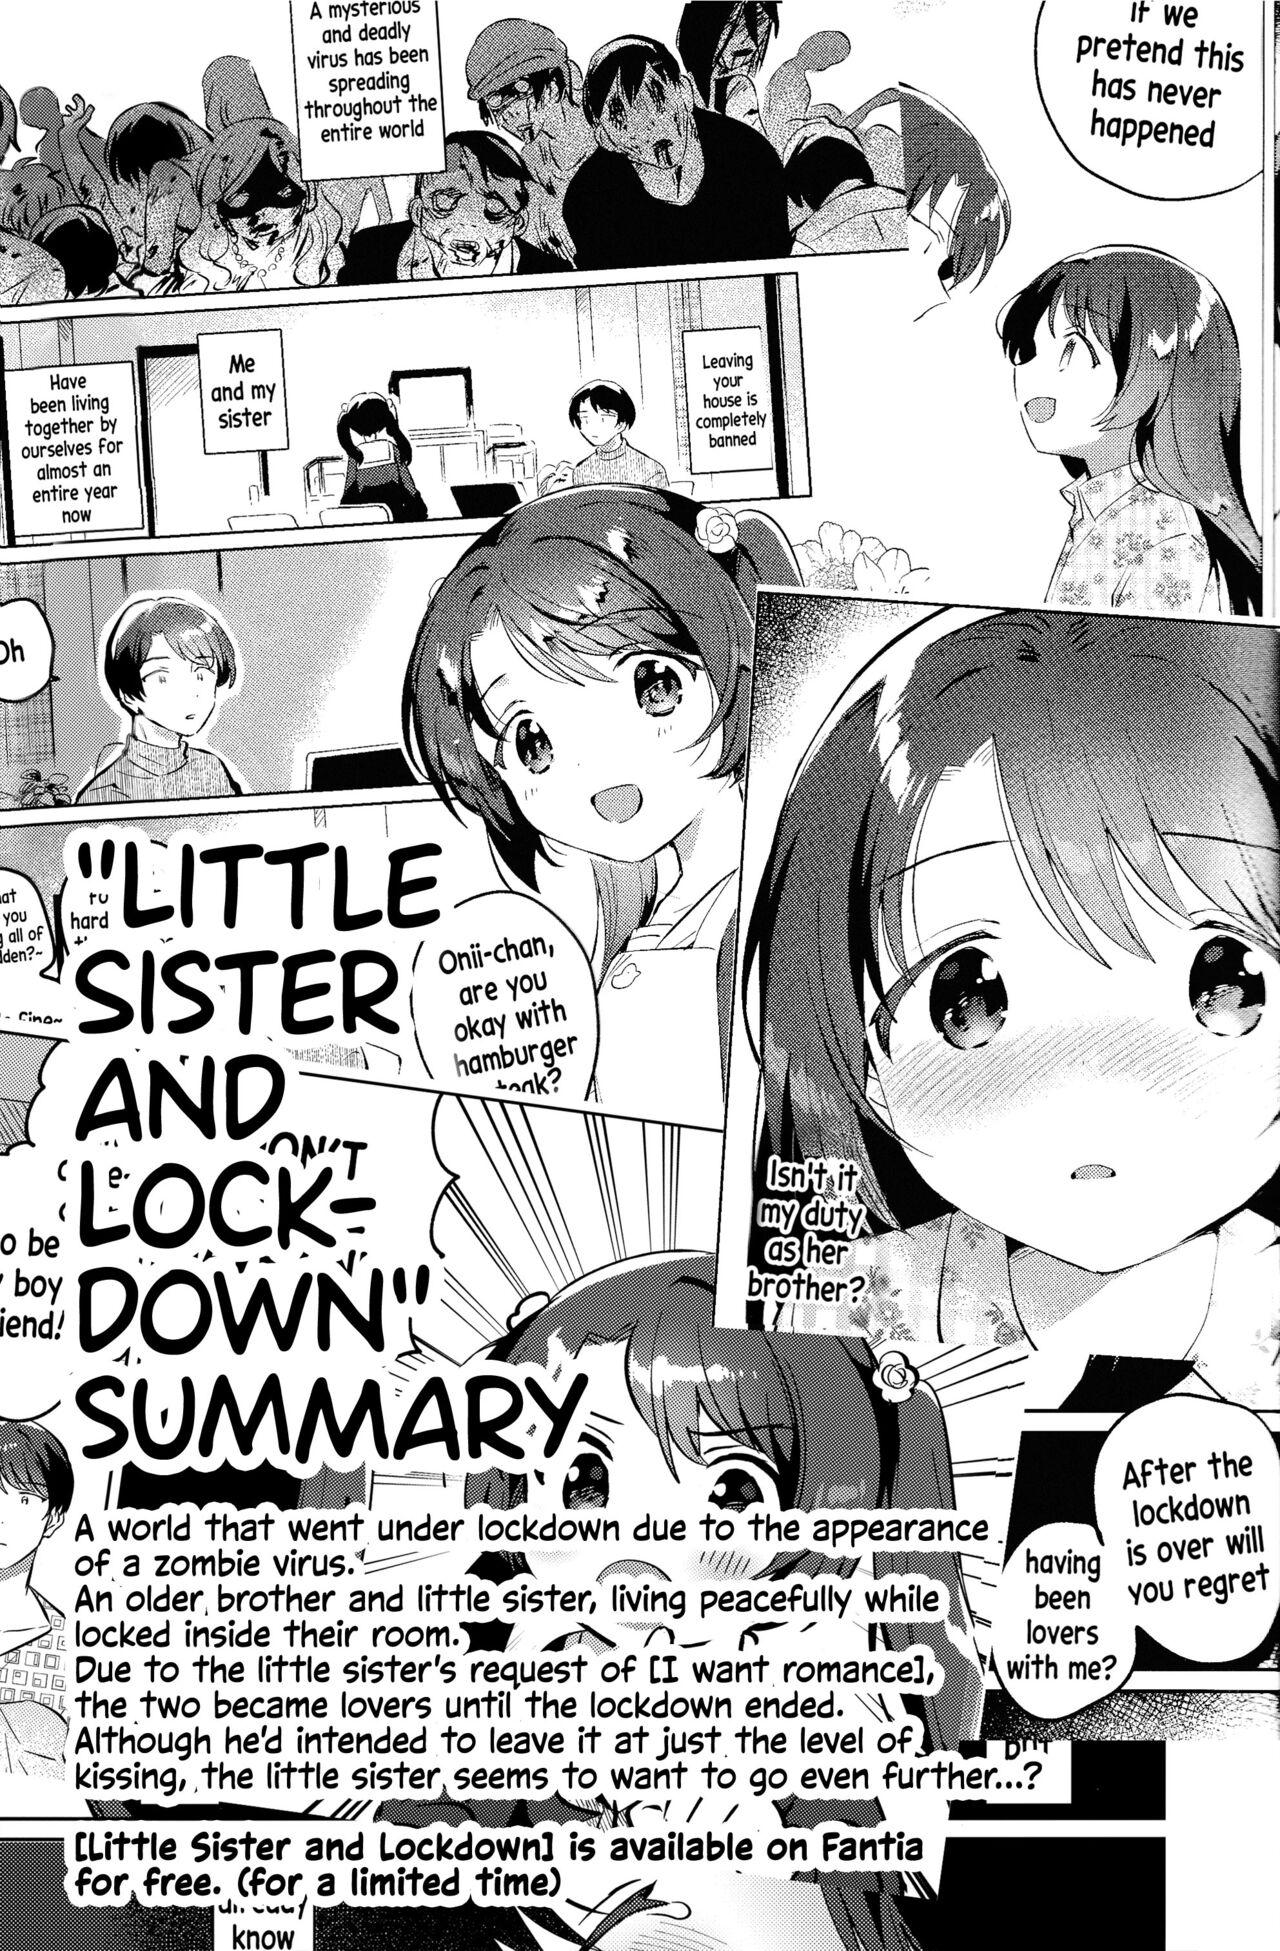 Imouto to Lockdown √hell | In Lockdown Hell With My Little Sister 3